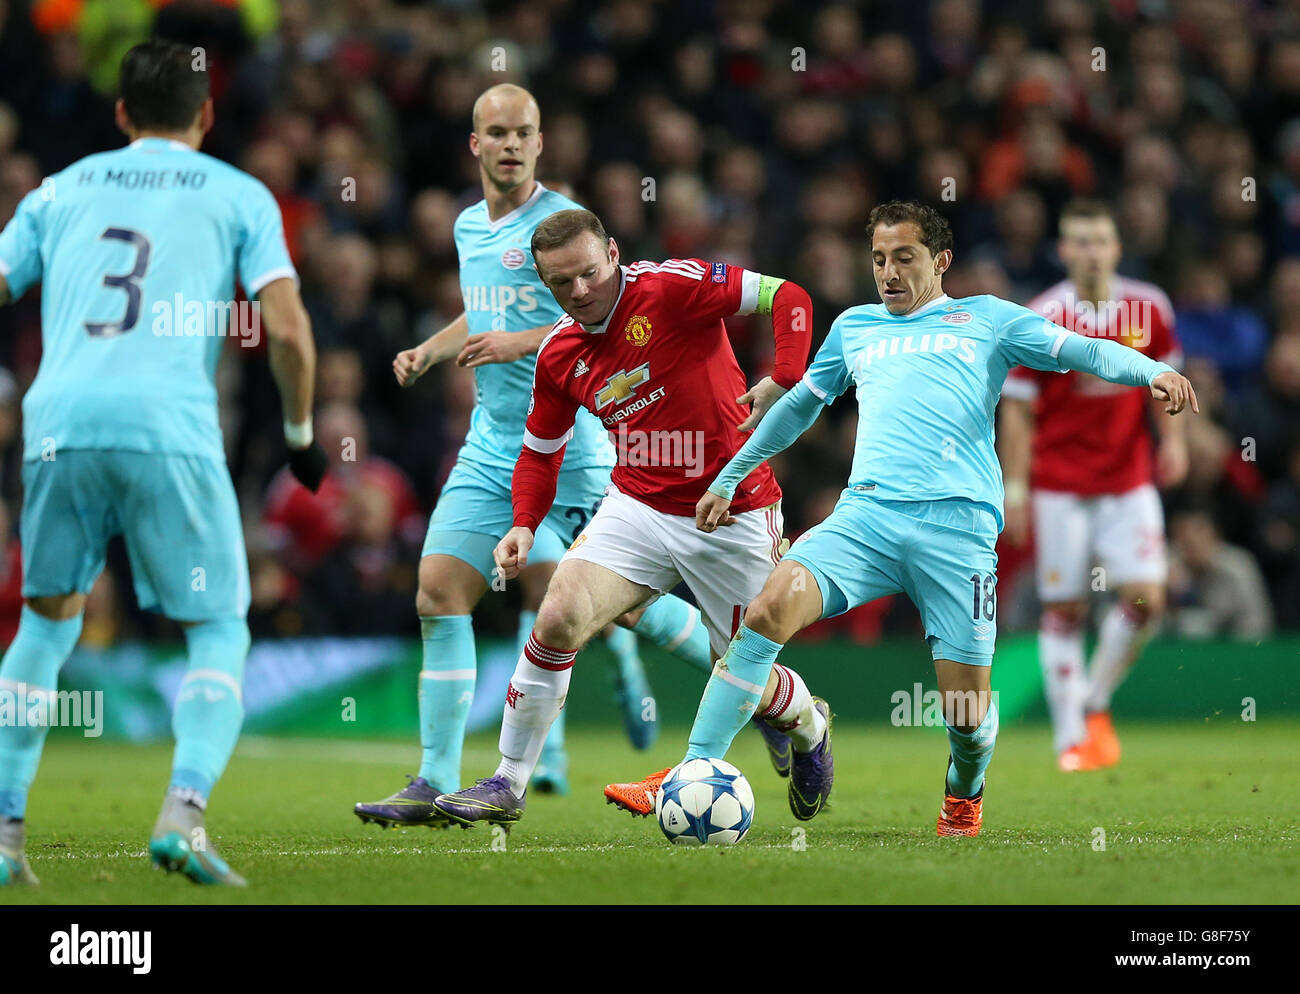 Manchester United v PSV Eindhoven - UEFA Champions League - Group B - Old Trafford Stock Photo